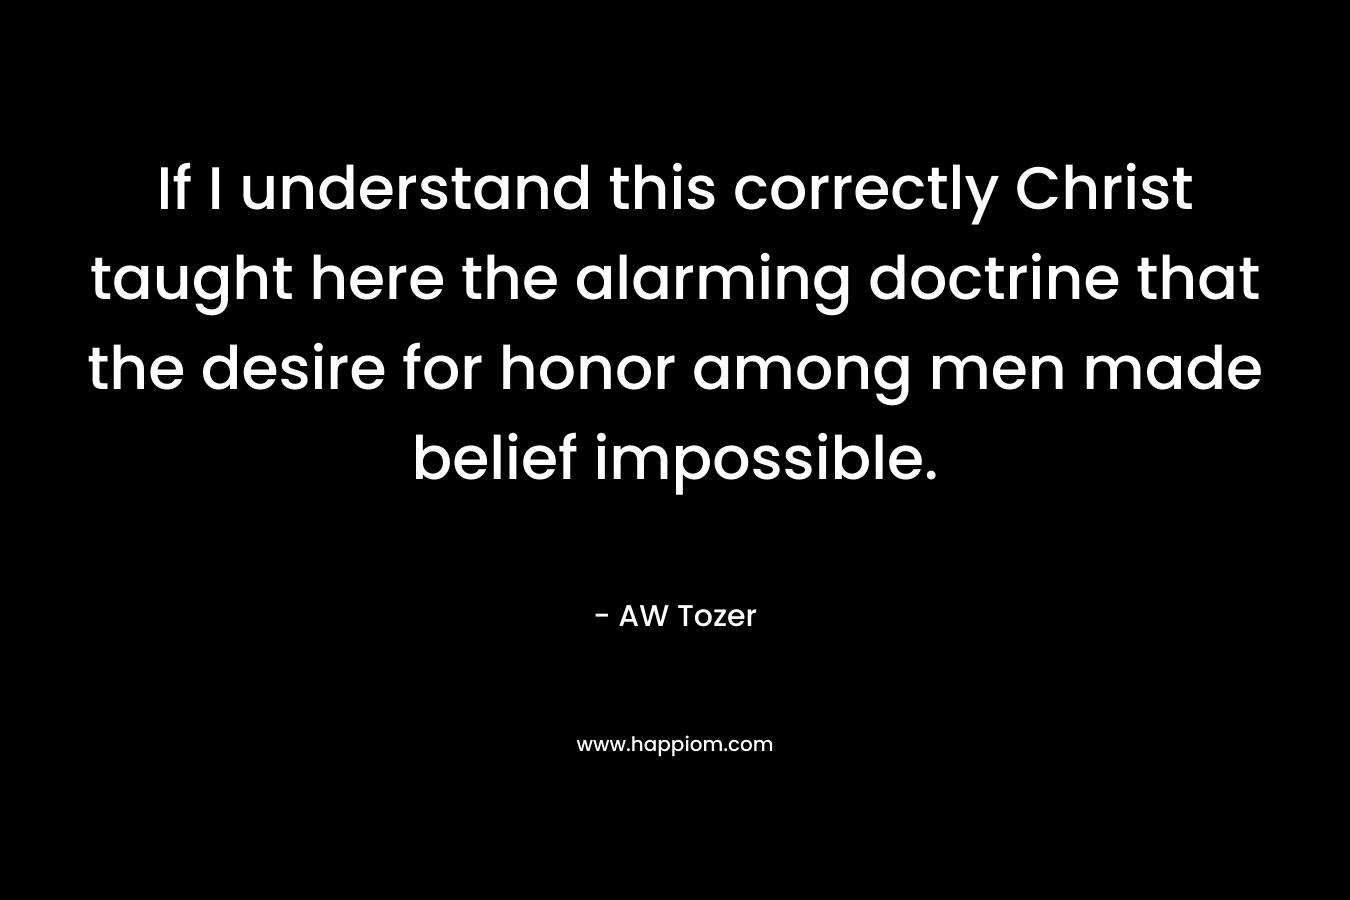 If I understand this correctly Christ taught here the alarming doctrine that the desire for honor among men made belief impossible. – AW Tozer